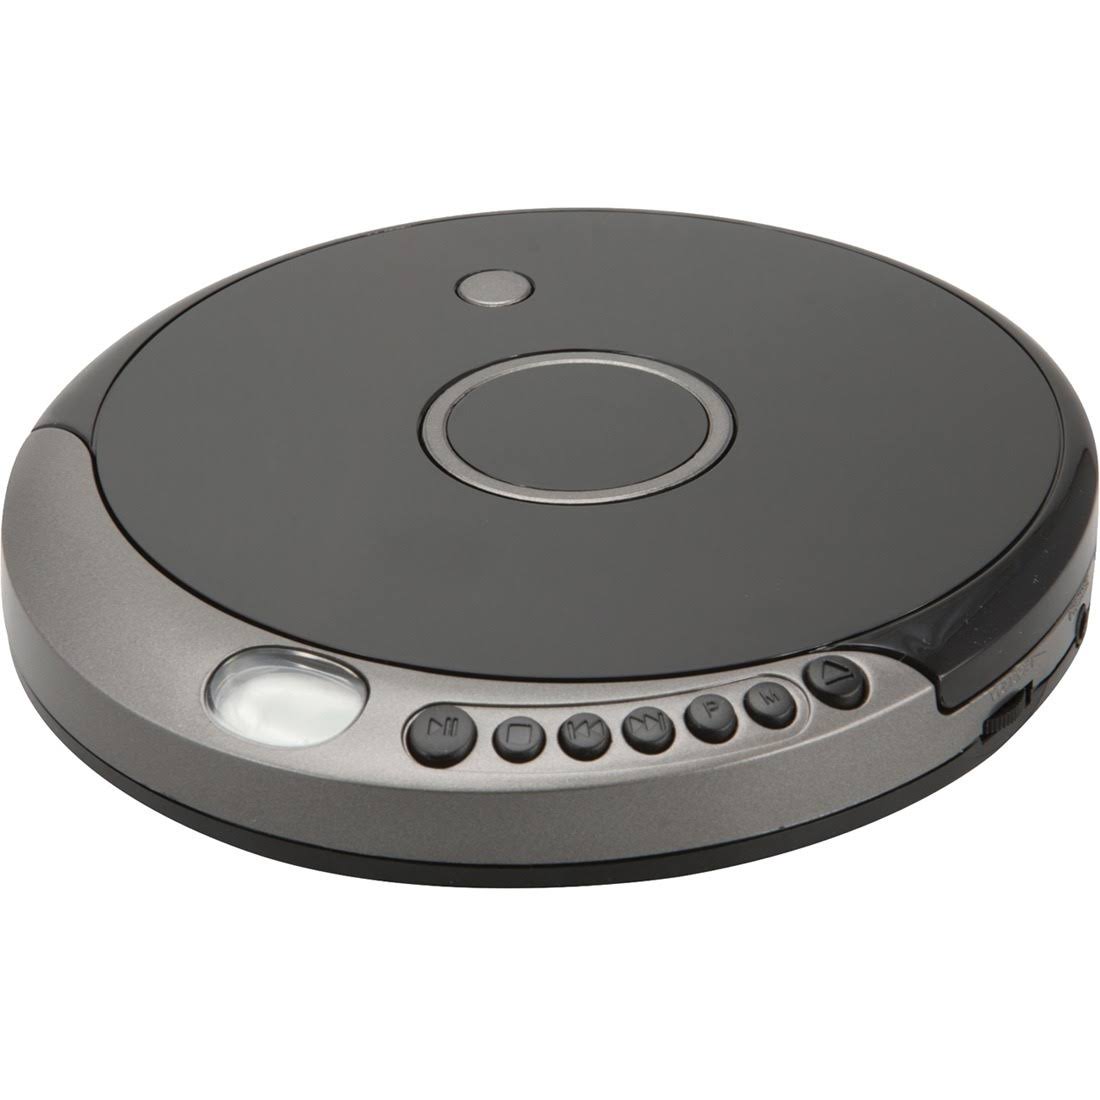 Gpx Portable CD Player - With Bluetooth Transmitter